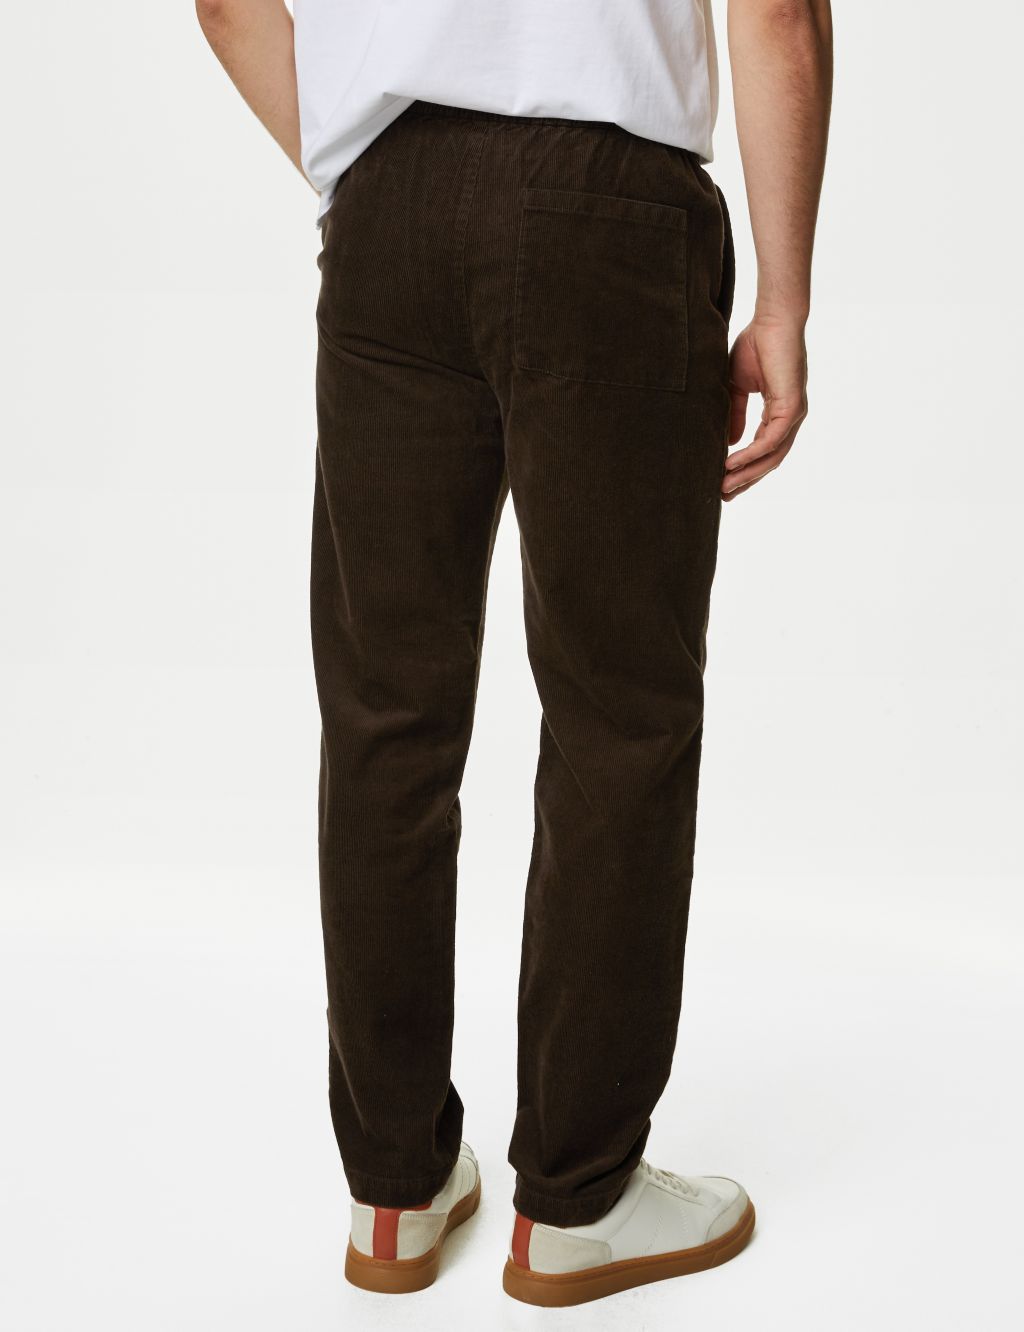 Tapered Fit Corduroy Stretch Joggers image 5